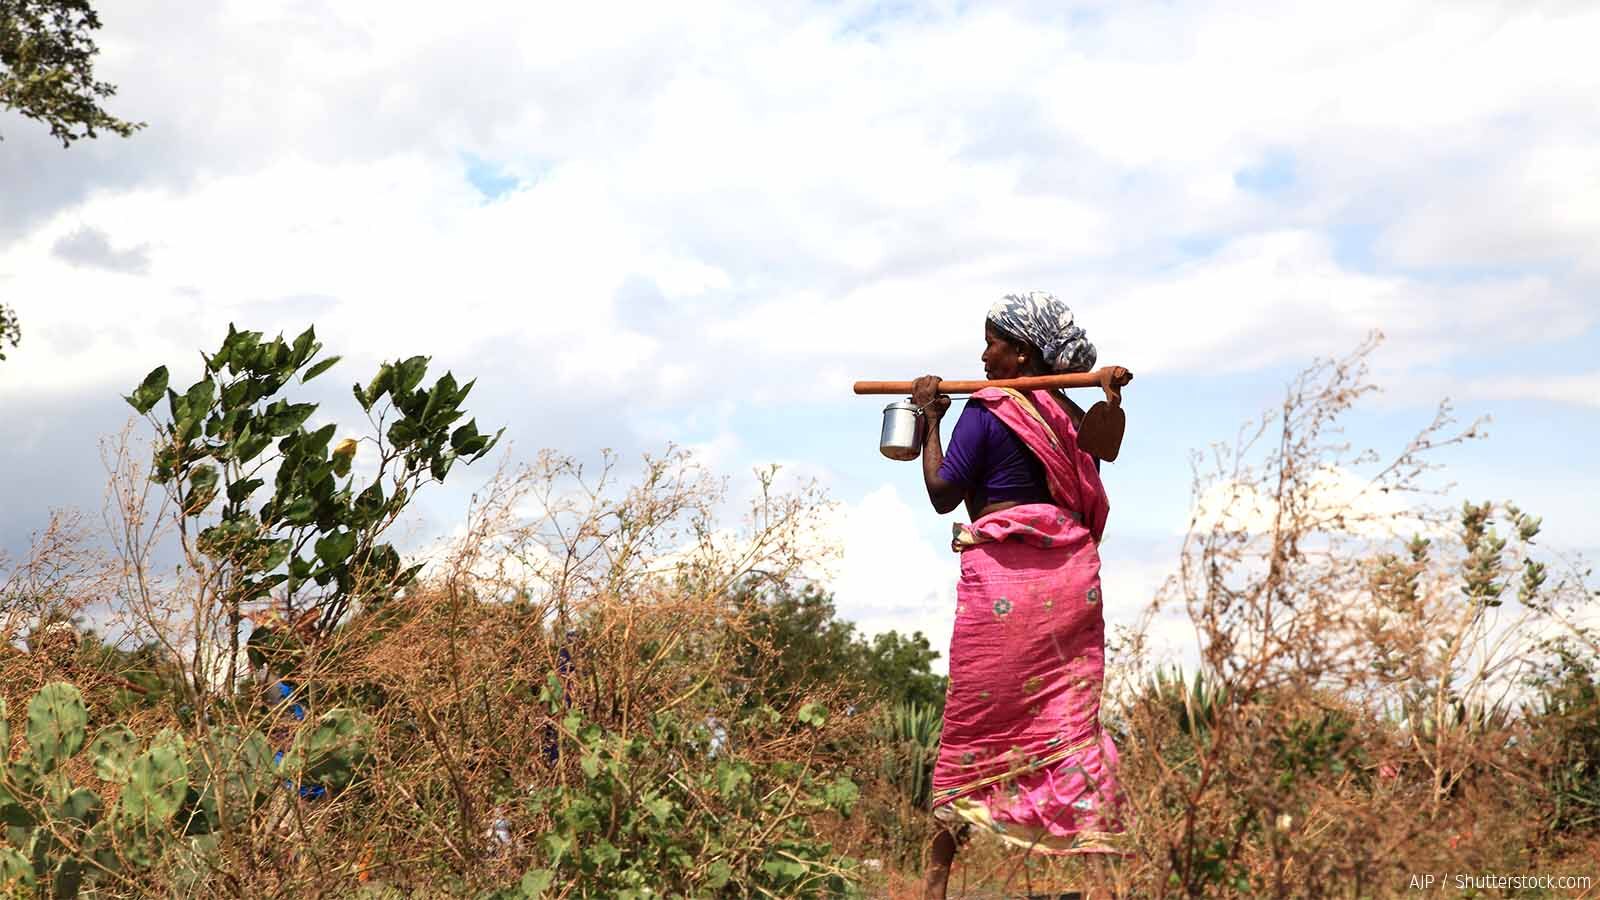 Why We Don't Know How Much Land Women Own